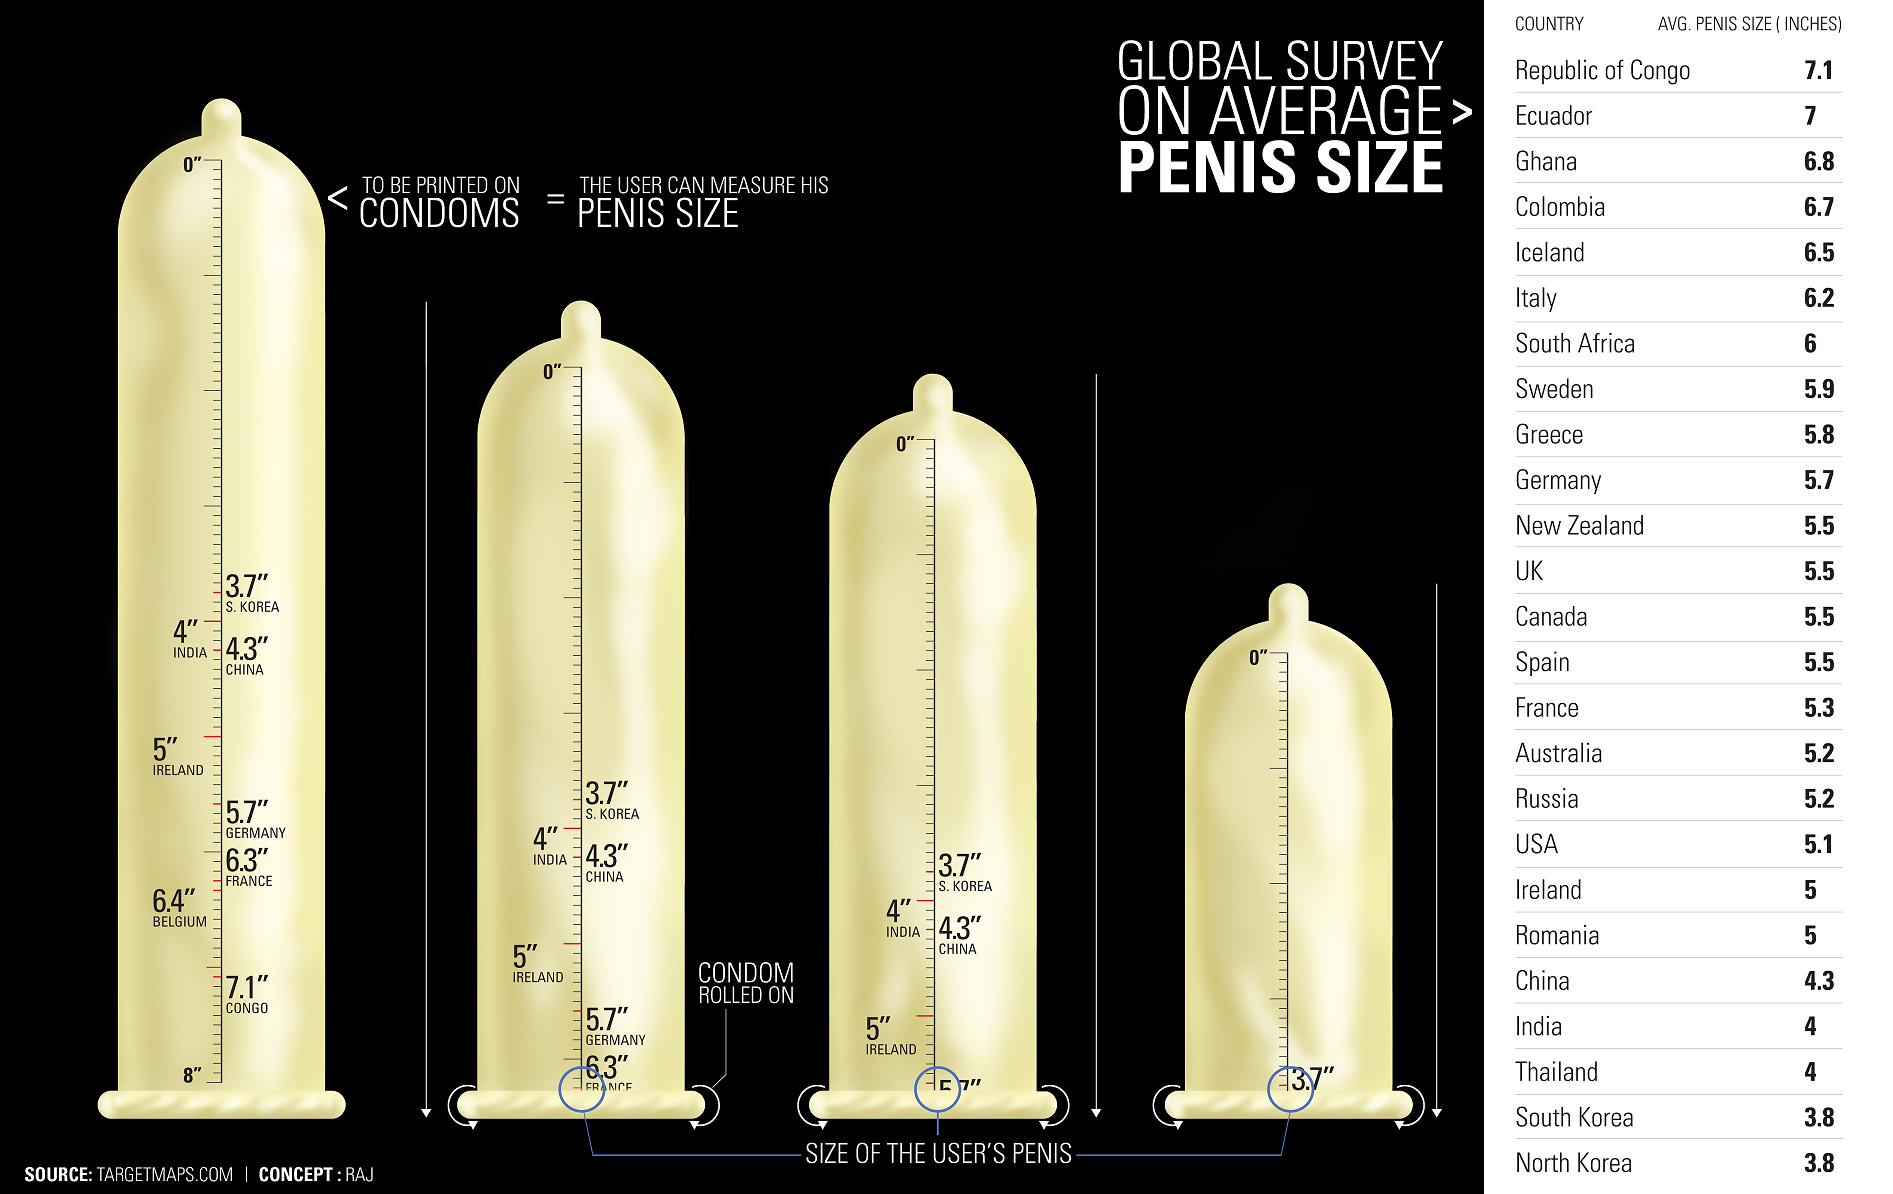 How big is the average penis